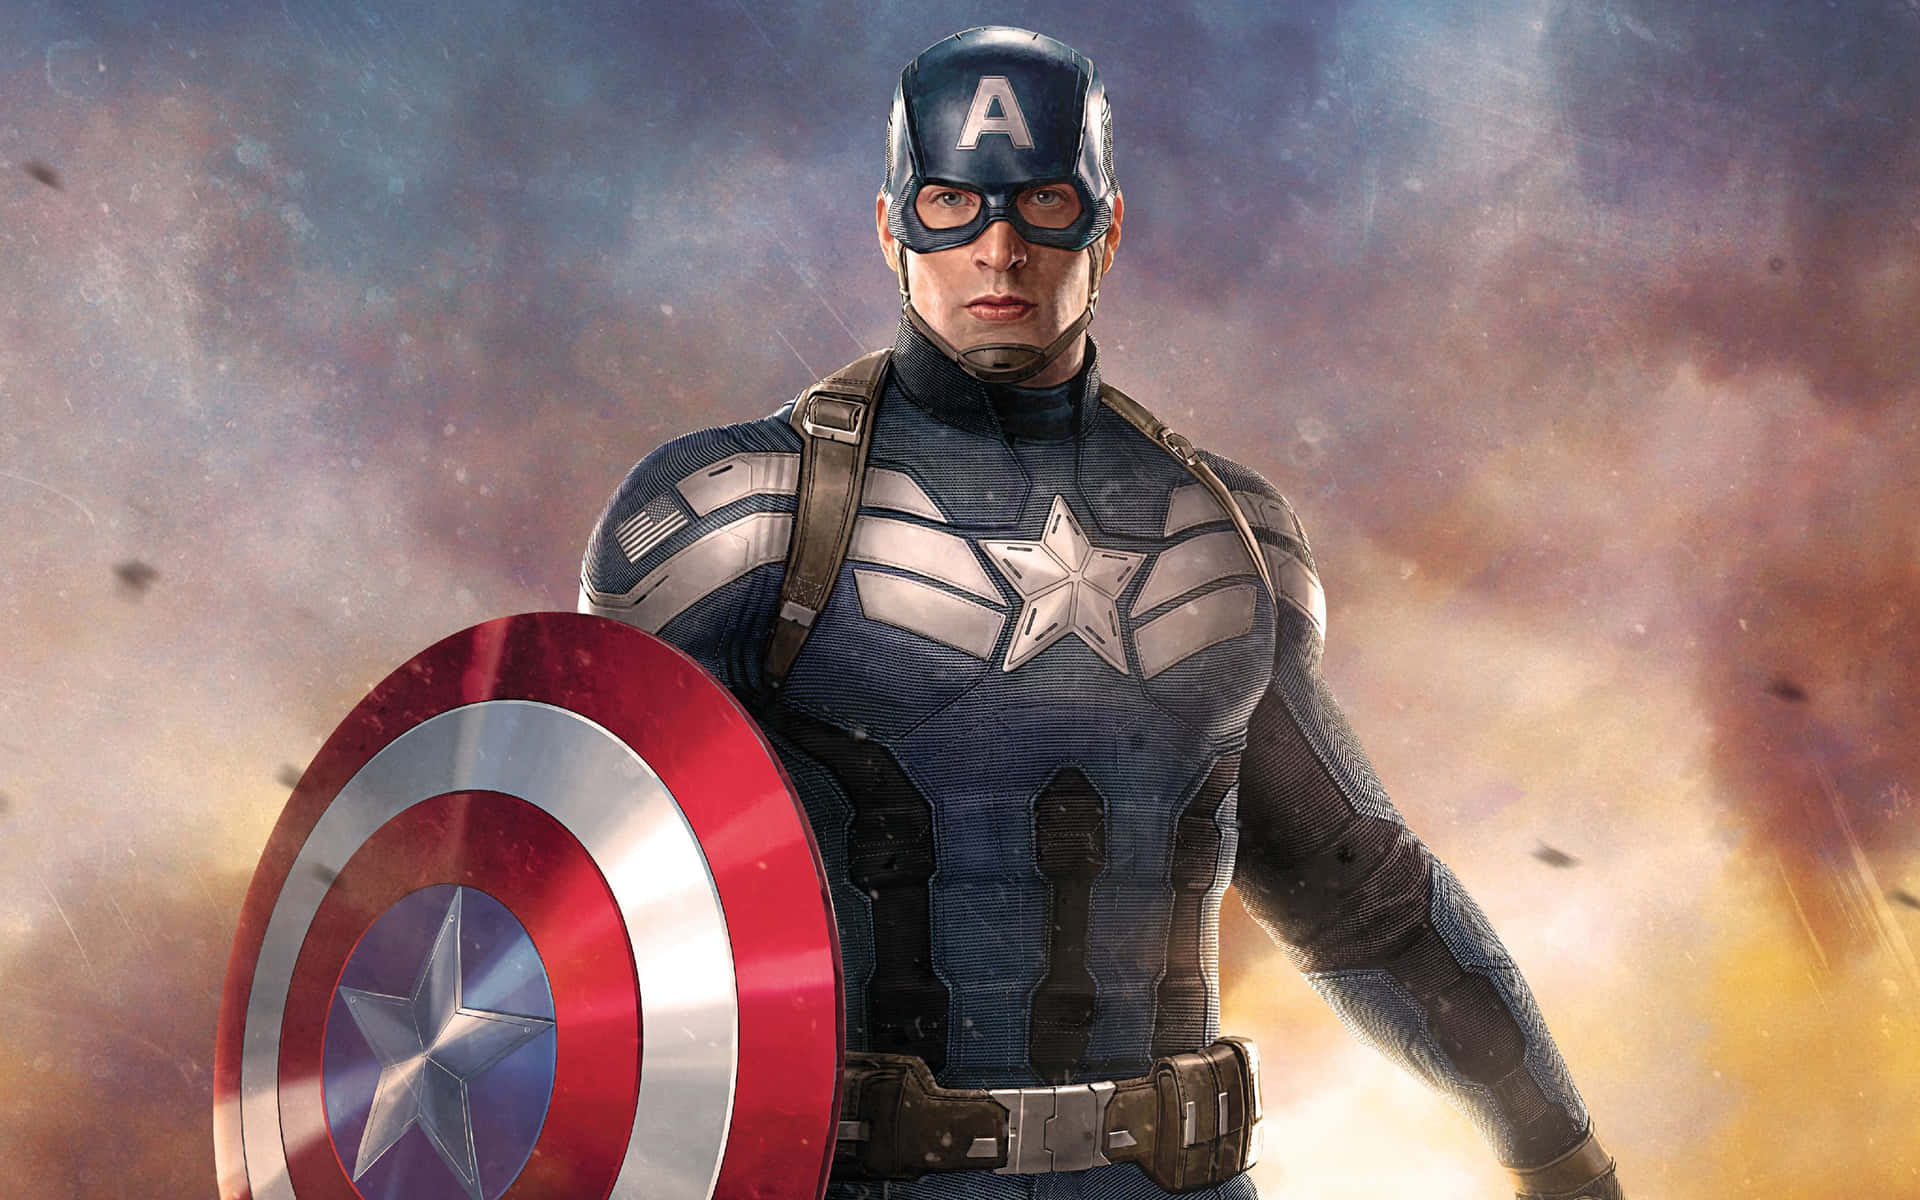 Captain America stands tall and proud